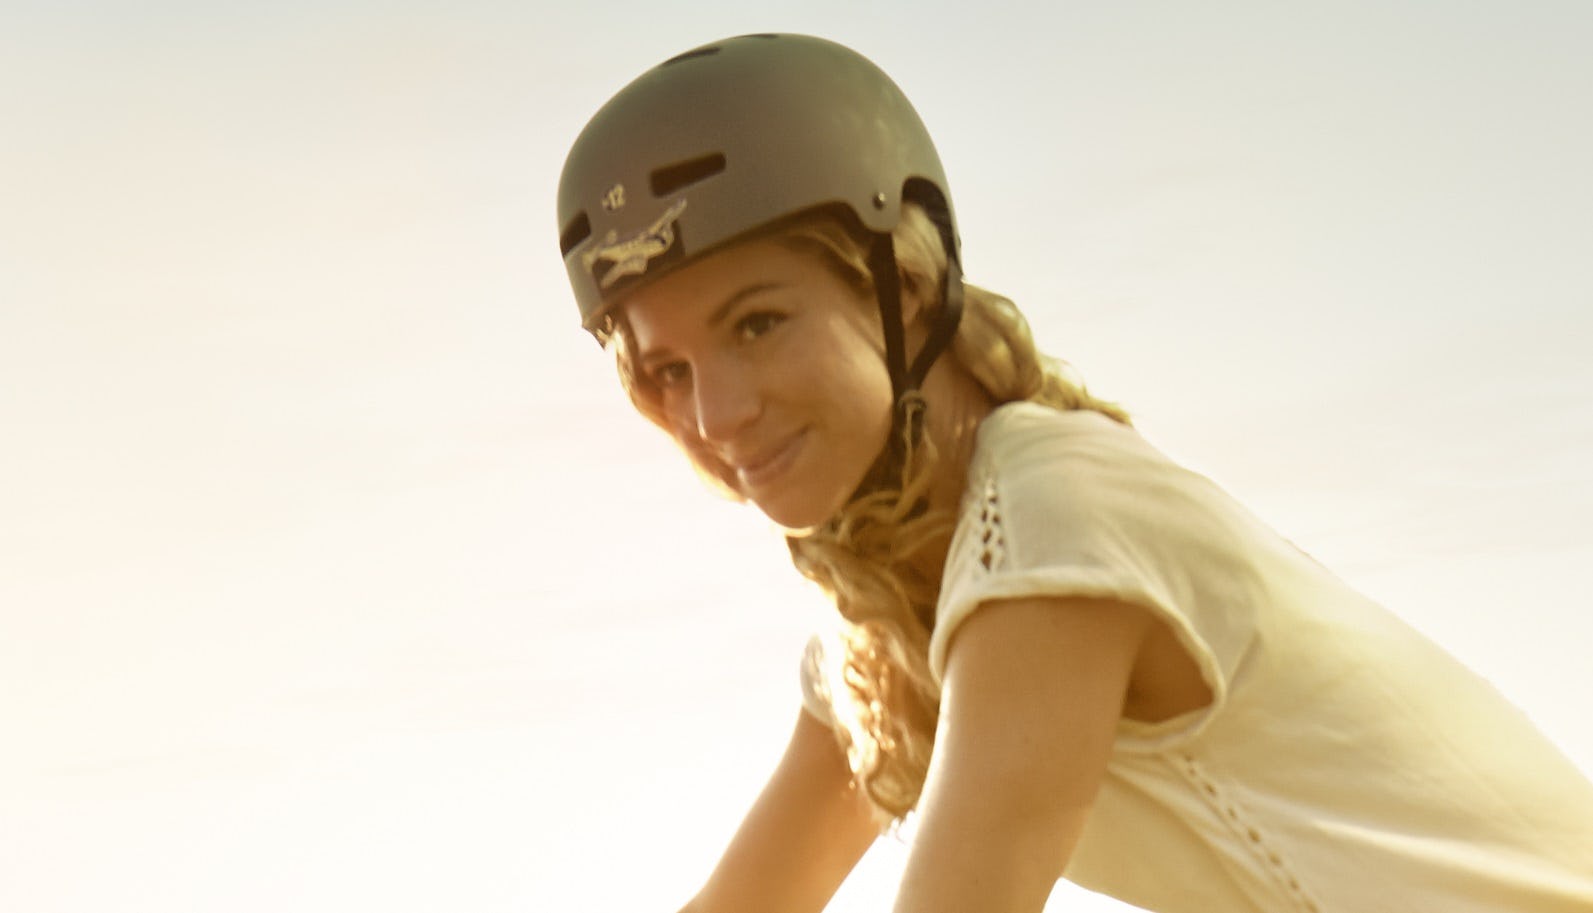 Currently industry players are making a joint effort in developing a helmet for speed e-bike usage that looks like a bicycle helmet, but that meets the ECE-2205 standard for motorcycle & moped helmets. - Photo Bosch